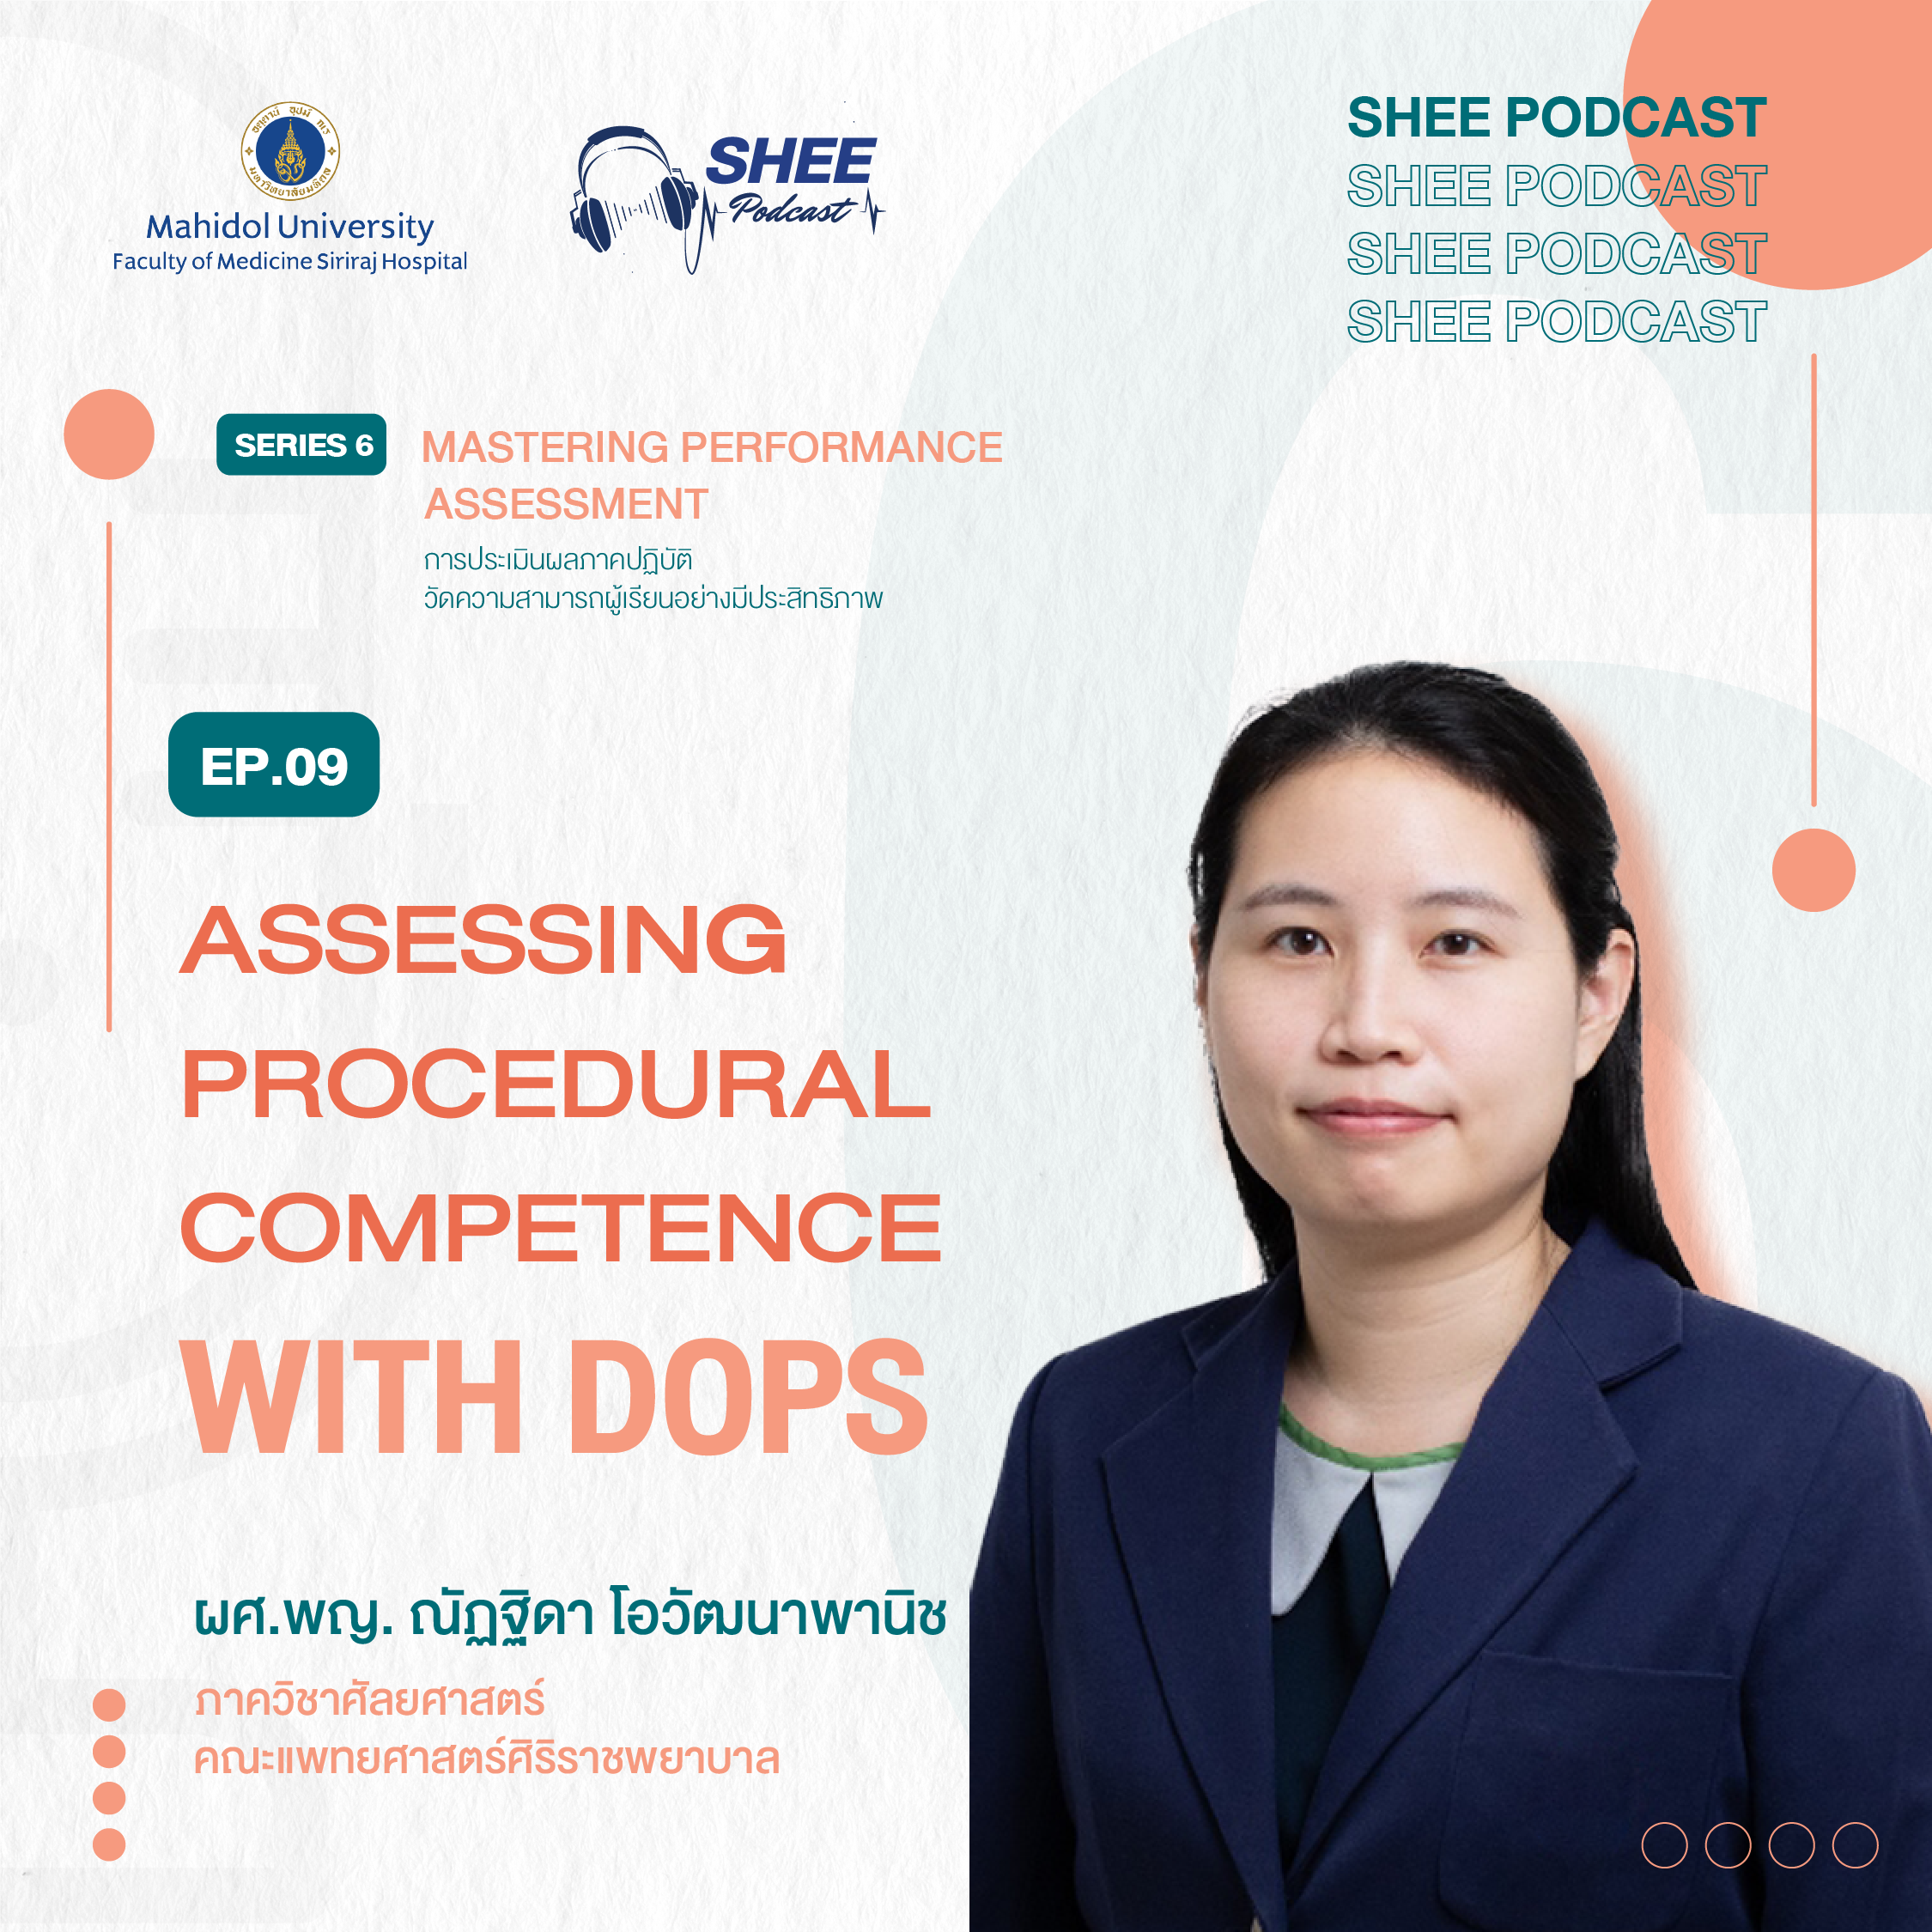 EP09 : Assessing Procedural Competence with DOPS